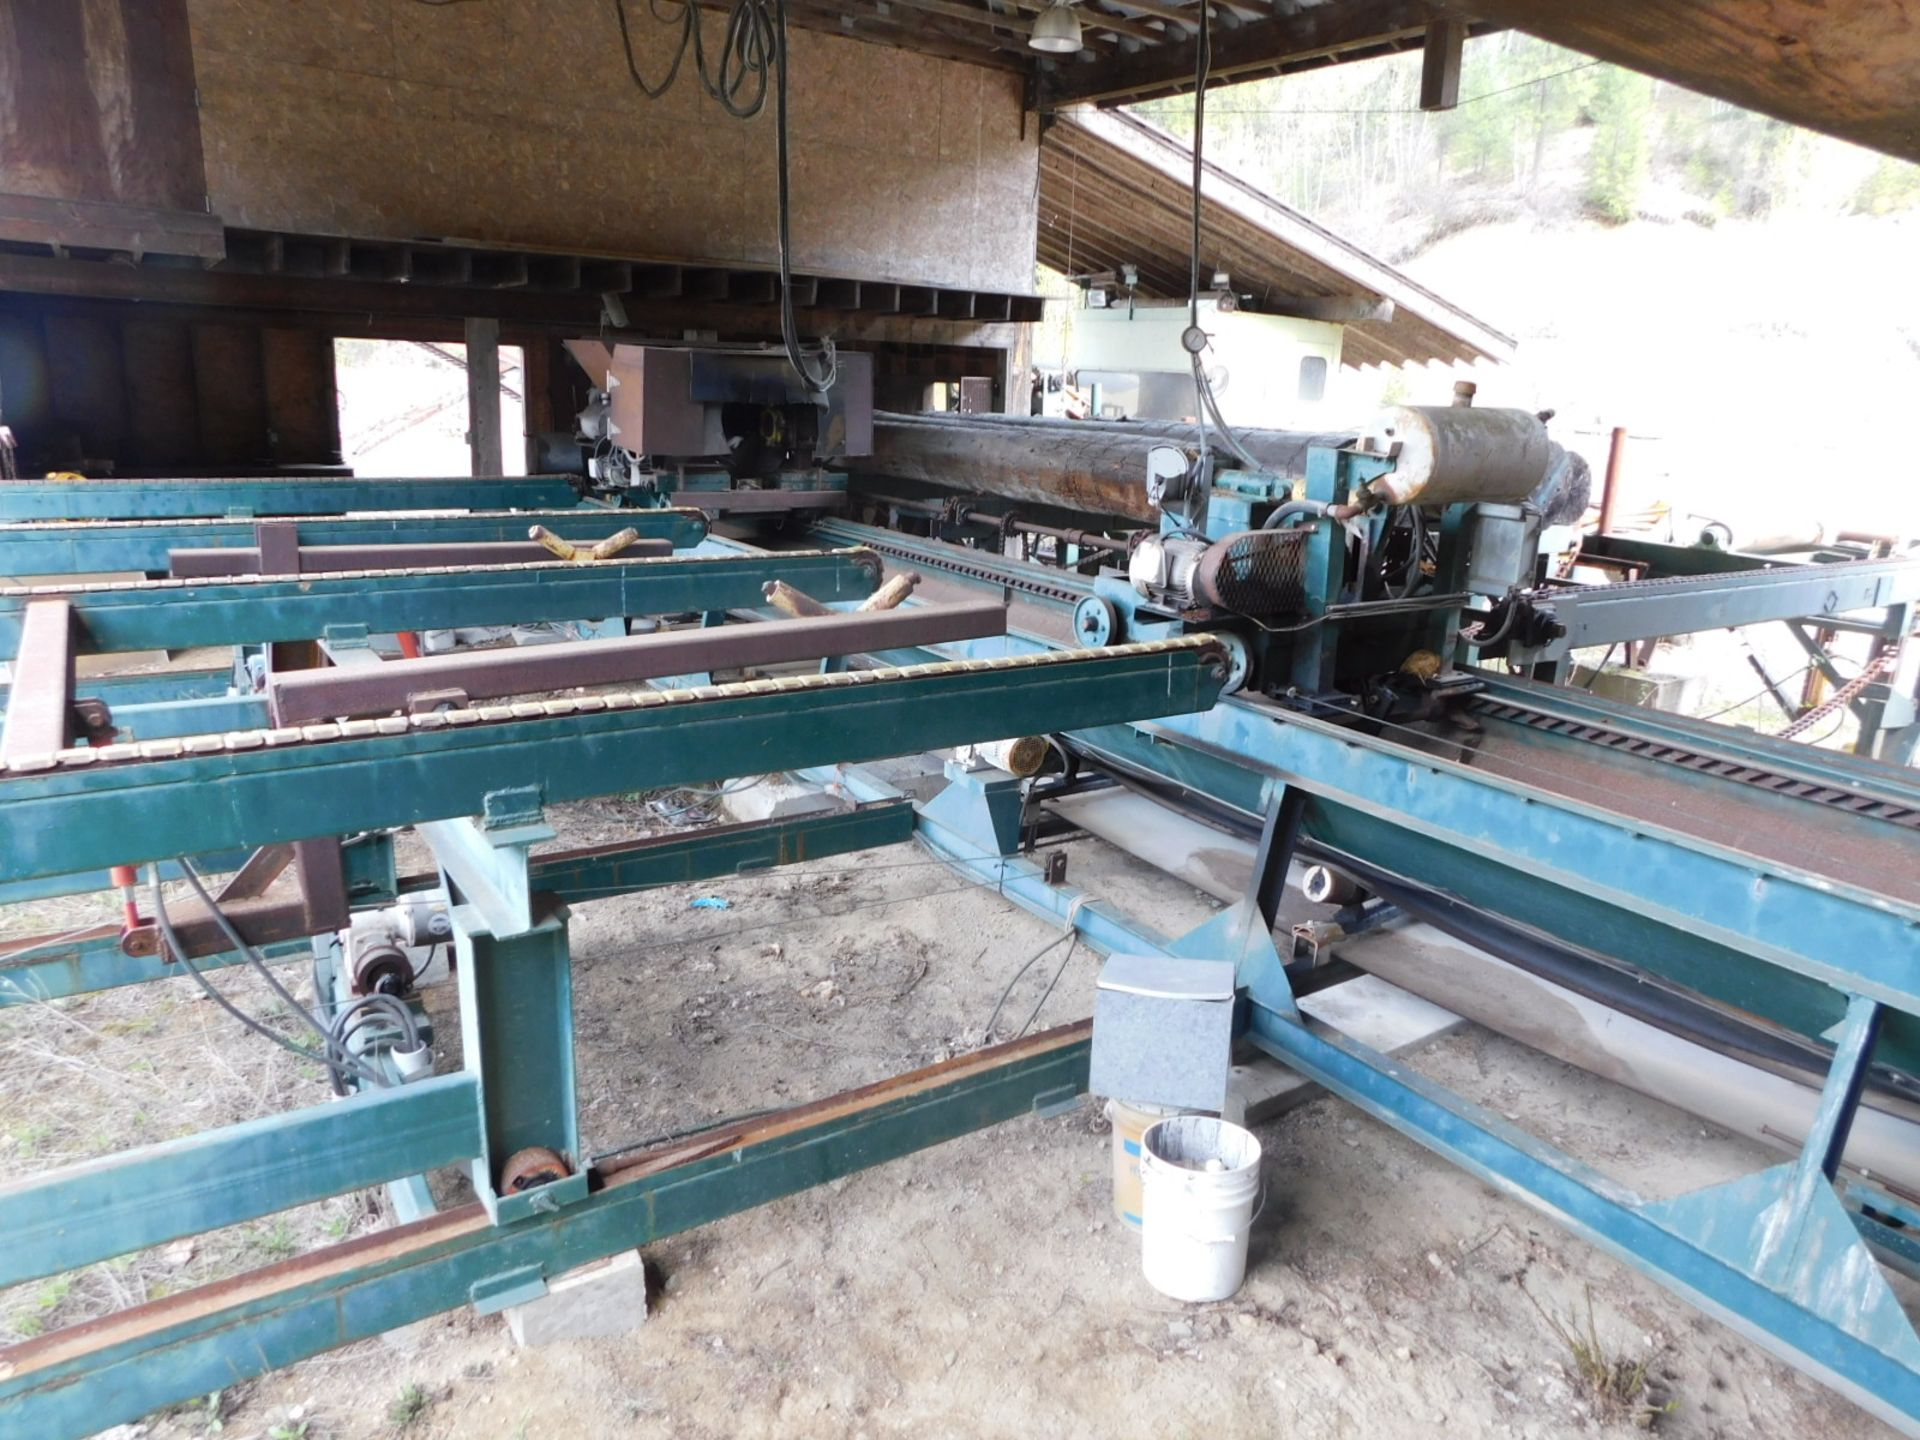 LOG LATHE SYSTEM: UP TO 48" X 30' LOG, (2) ADJUSTABLE CUTTER HEADS, 5HP, 460V, 1755RPM, HEAD CAN - Image 20 of 26